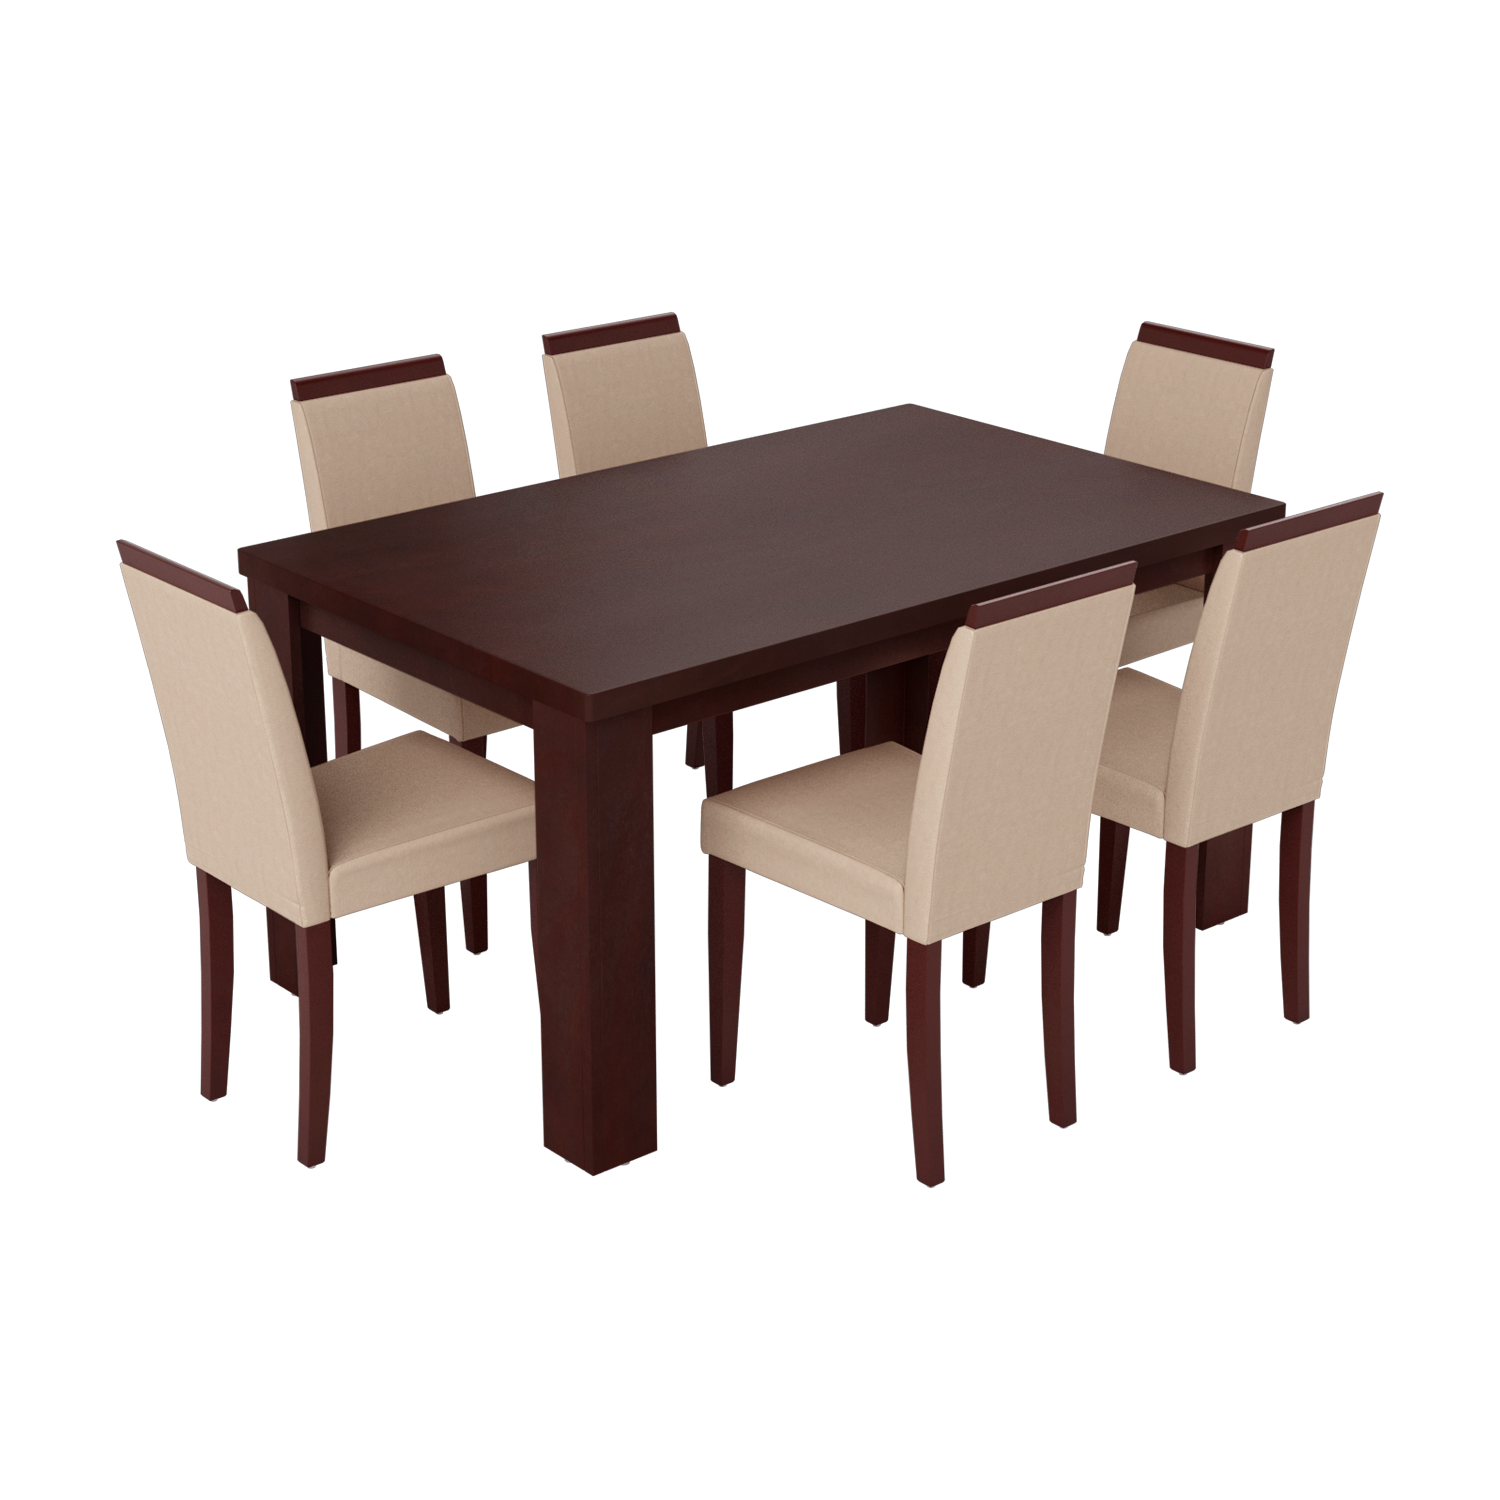 Jack 6 Seater Dining Table Set In, 6 Seater Dining Table And Chair Dimensions